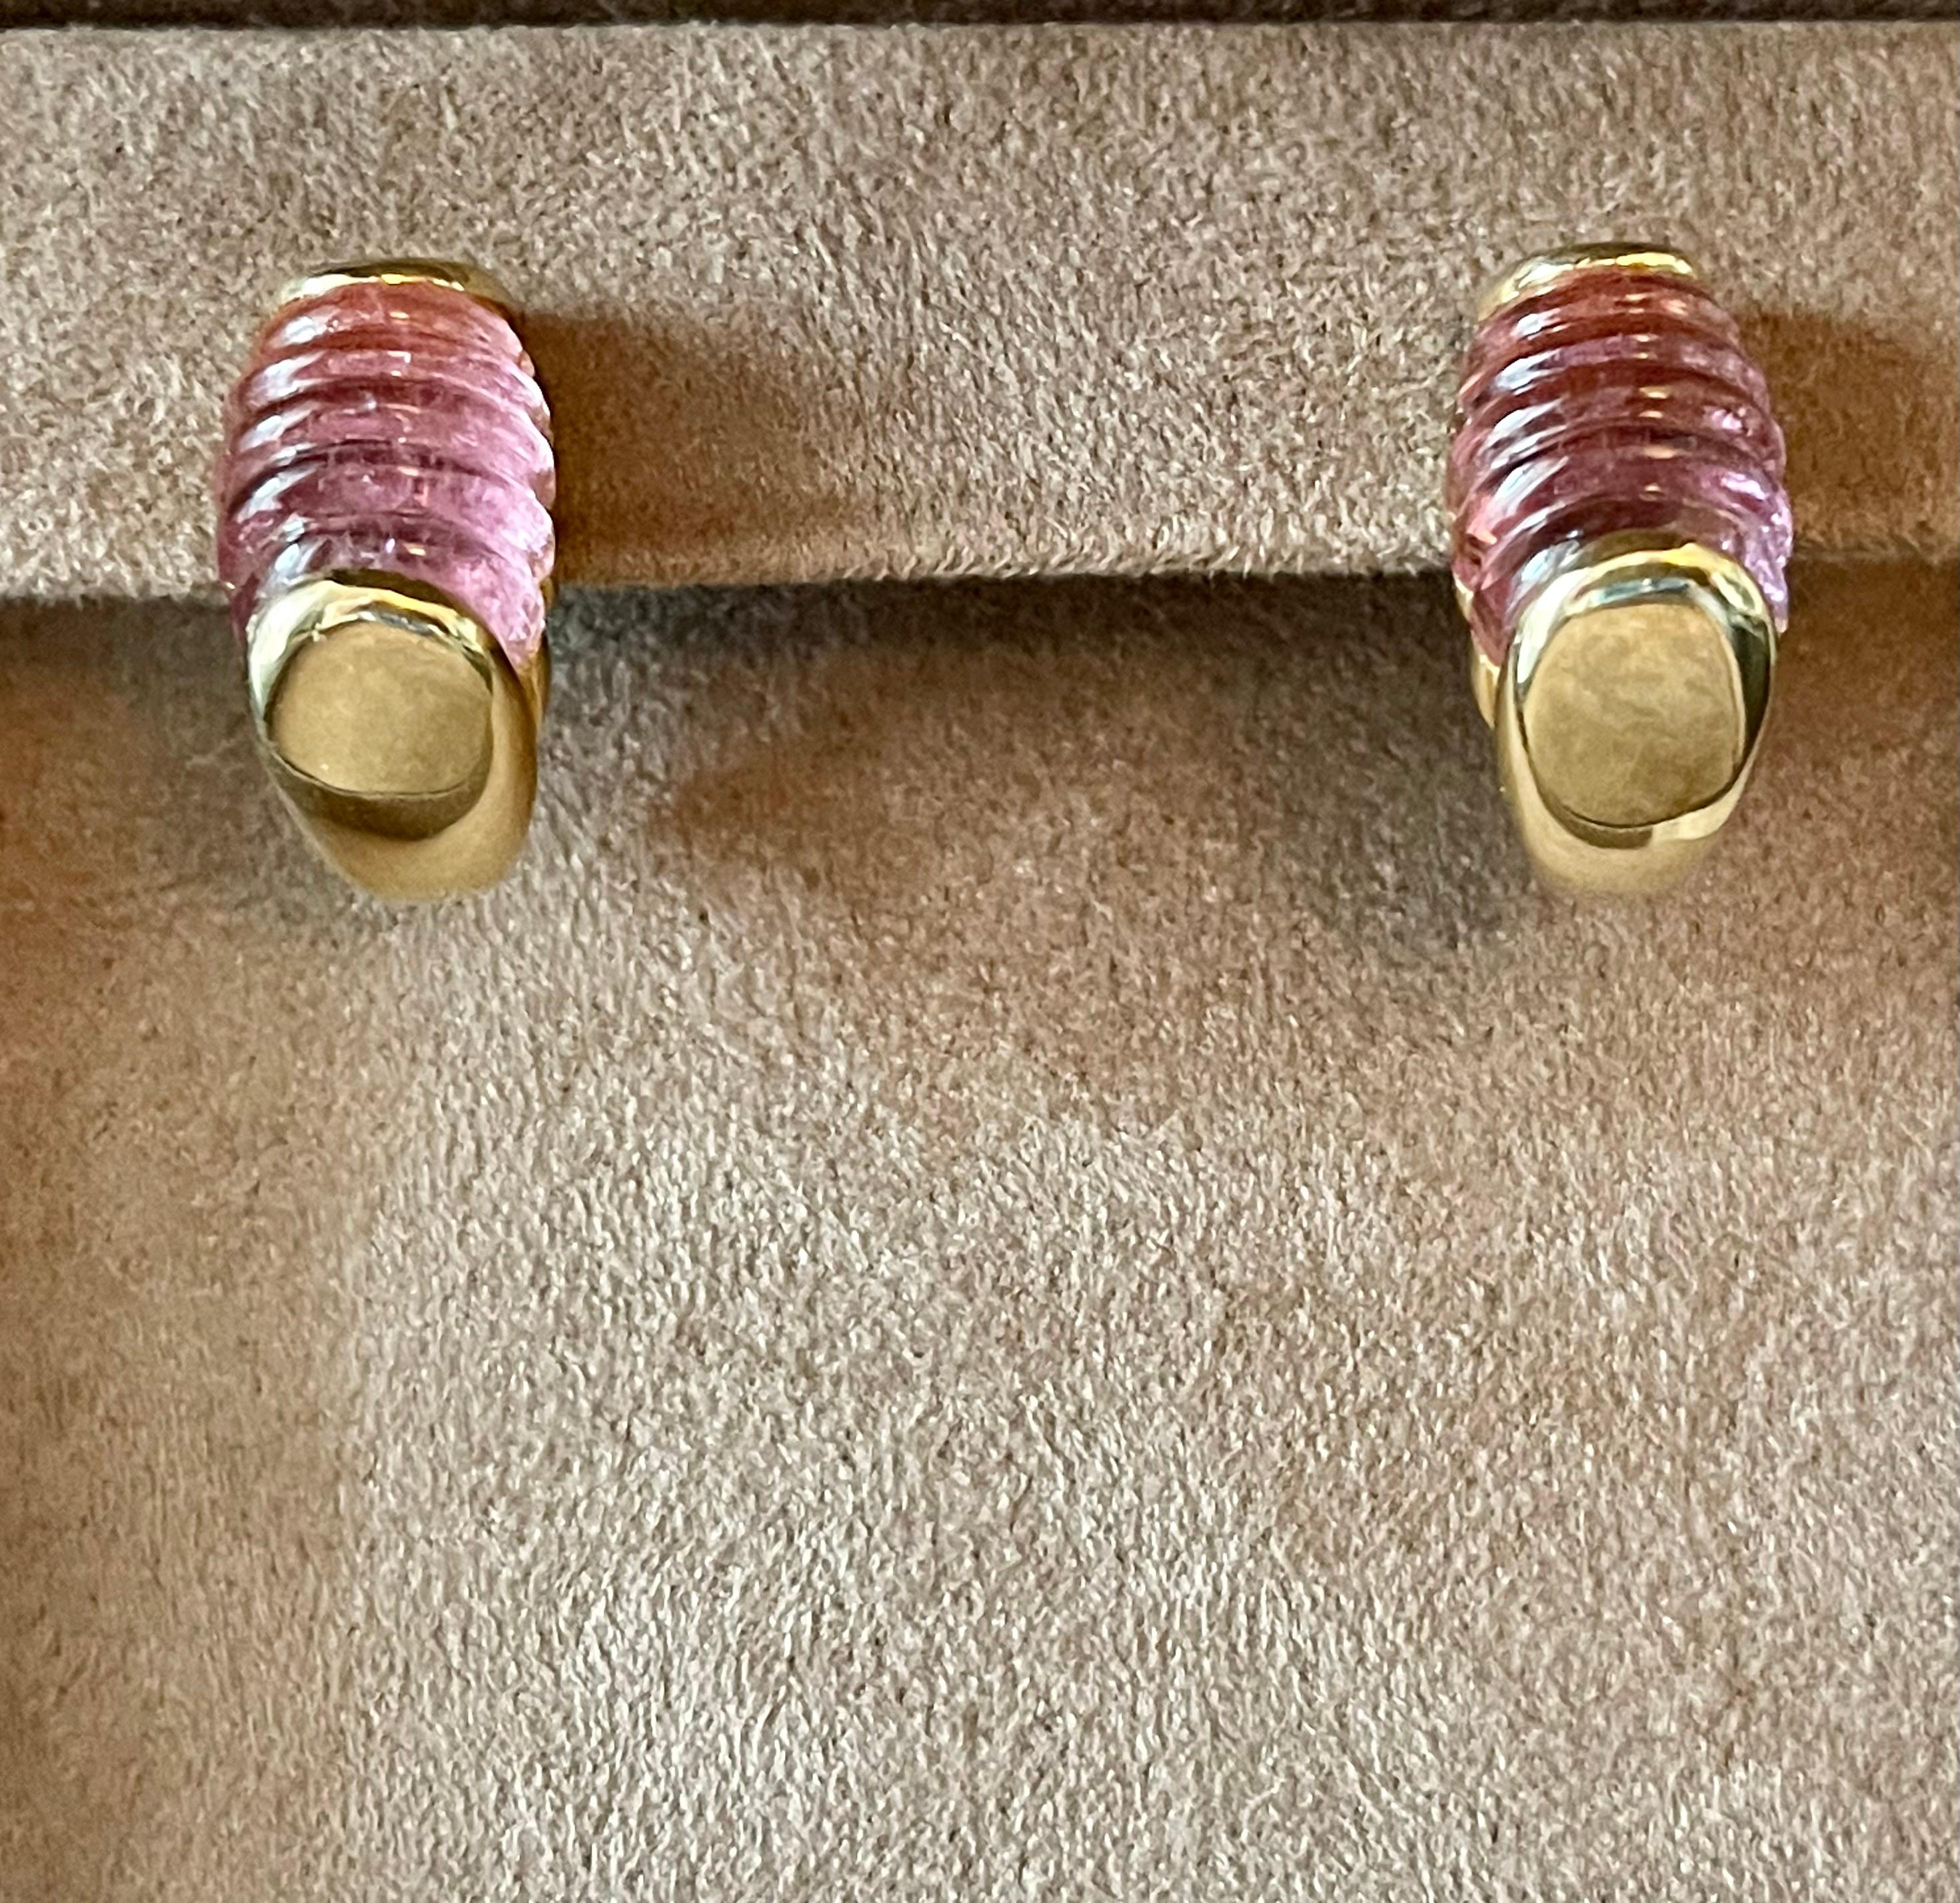 An iconic set of 18 K yellow Gold earclips showcasing 2 fancy cut engraved pink Tourmalines. 2.1 cm height and 1.10 cm wide. 16.81 grams. Stamped 750 with Italian assay marks for 18 karat gold
Fully signed Bvlgari, Made in Italy
QUESTIONS?  Contact